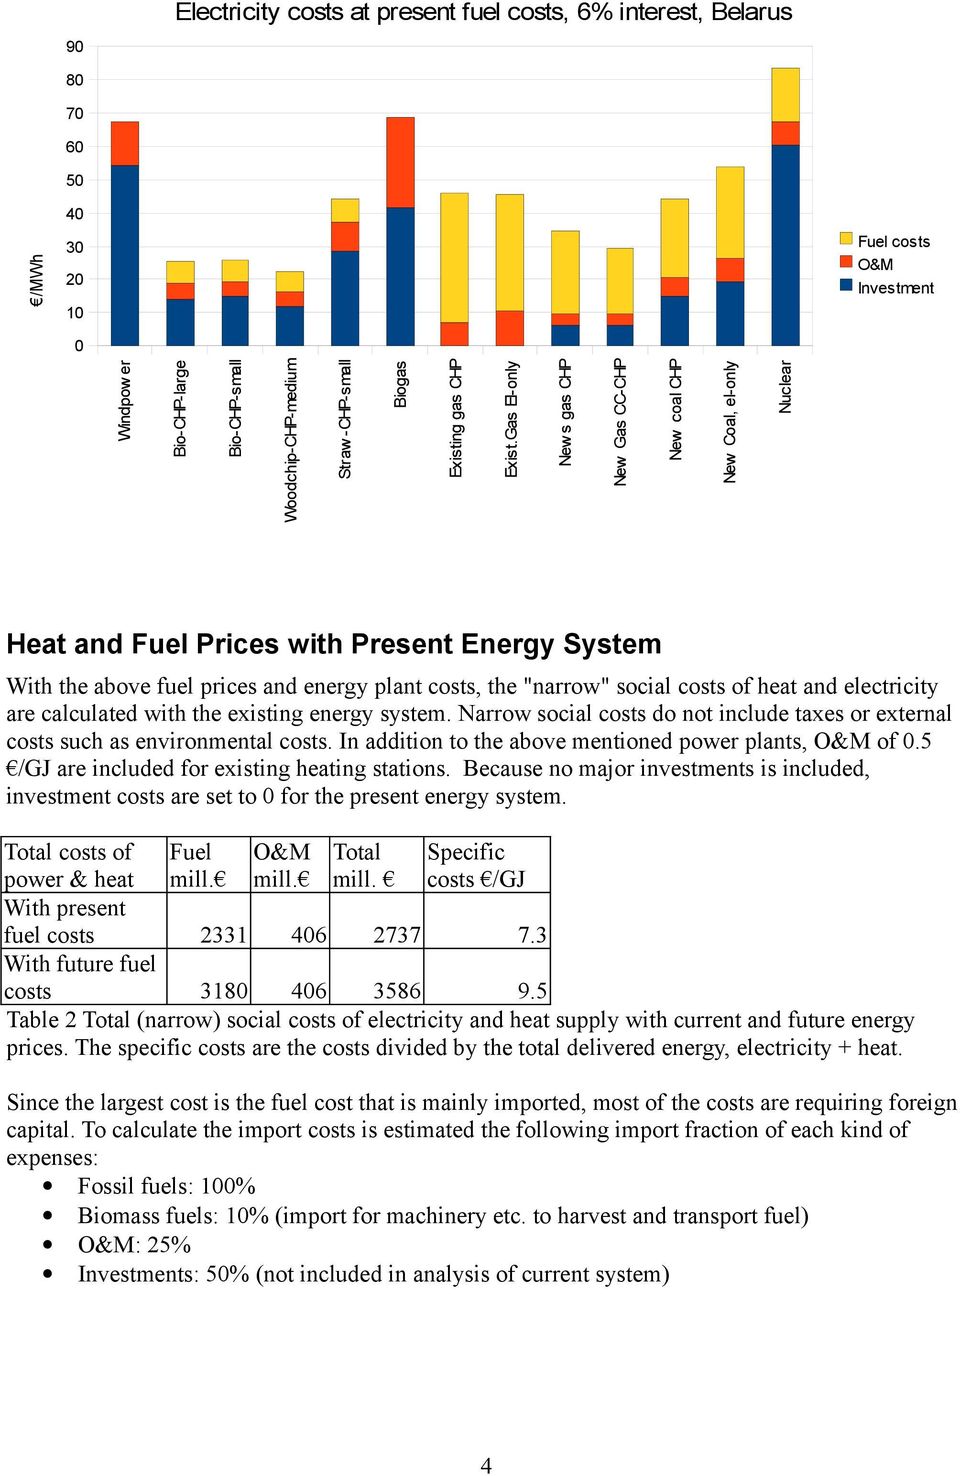 plant costs, the "narrow" social costs of heat and electricity are calculated with the existing energy system. Narrow social costs do not include taxes or external costs such as environmental costs.